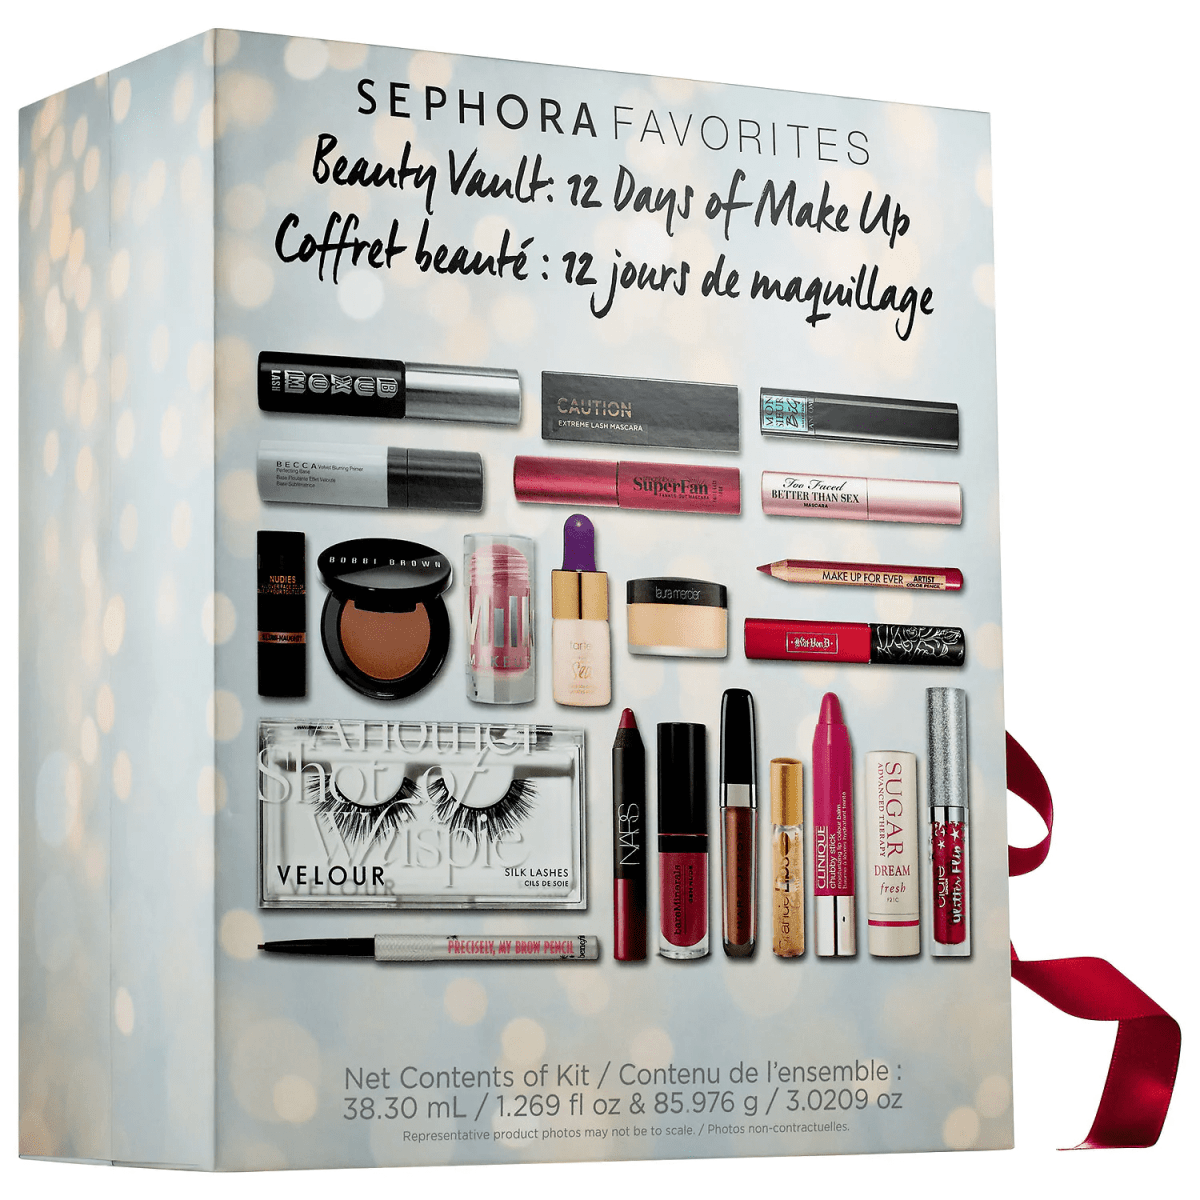 2018-sephora-favorites-beauty-vault-advent-calendar-available-now-coupons-hello-subscription